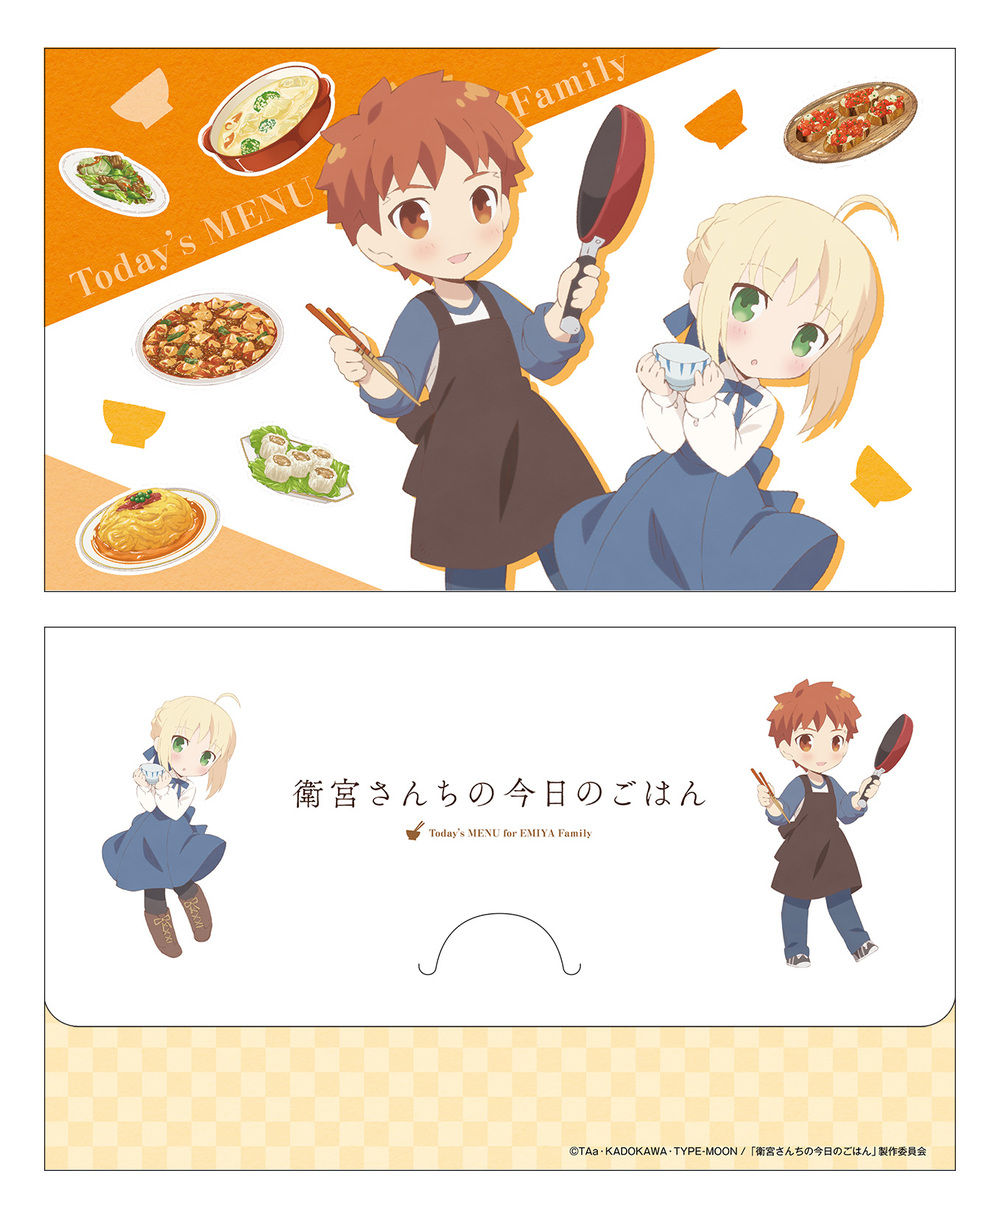 Today S Menu For Emiya Family Mini Clear Pocket Shiro Saber Set Of 5 Pieces 衛宮さんちの今日のごはん ミニクリアポケット 士郎 セイバー Anime Goods Bags Accessories